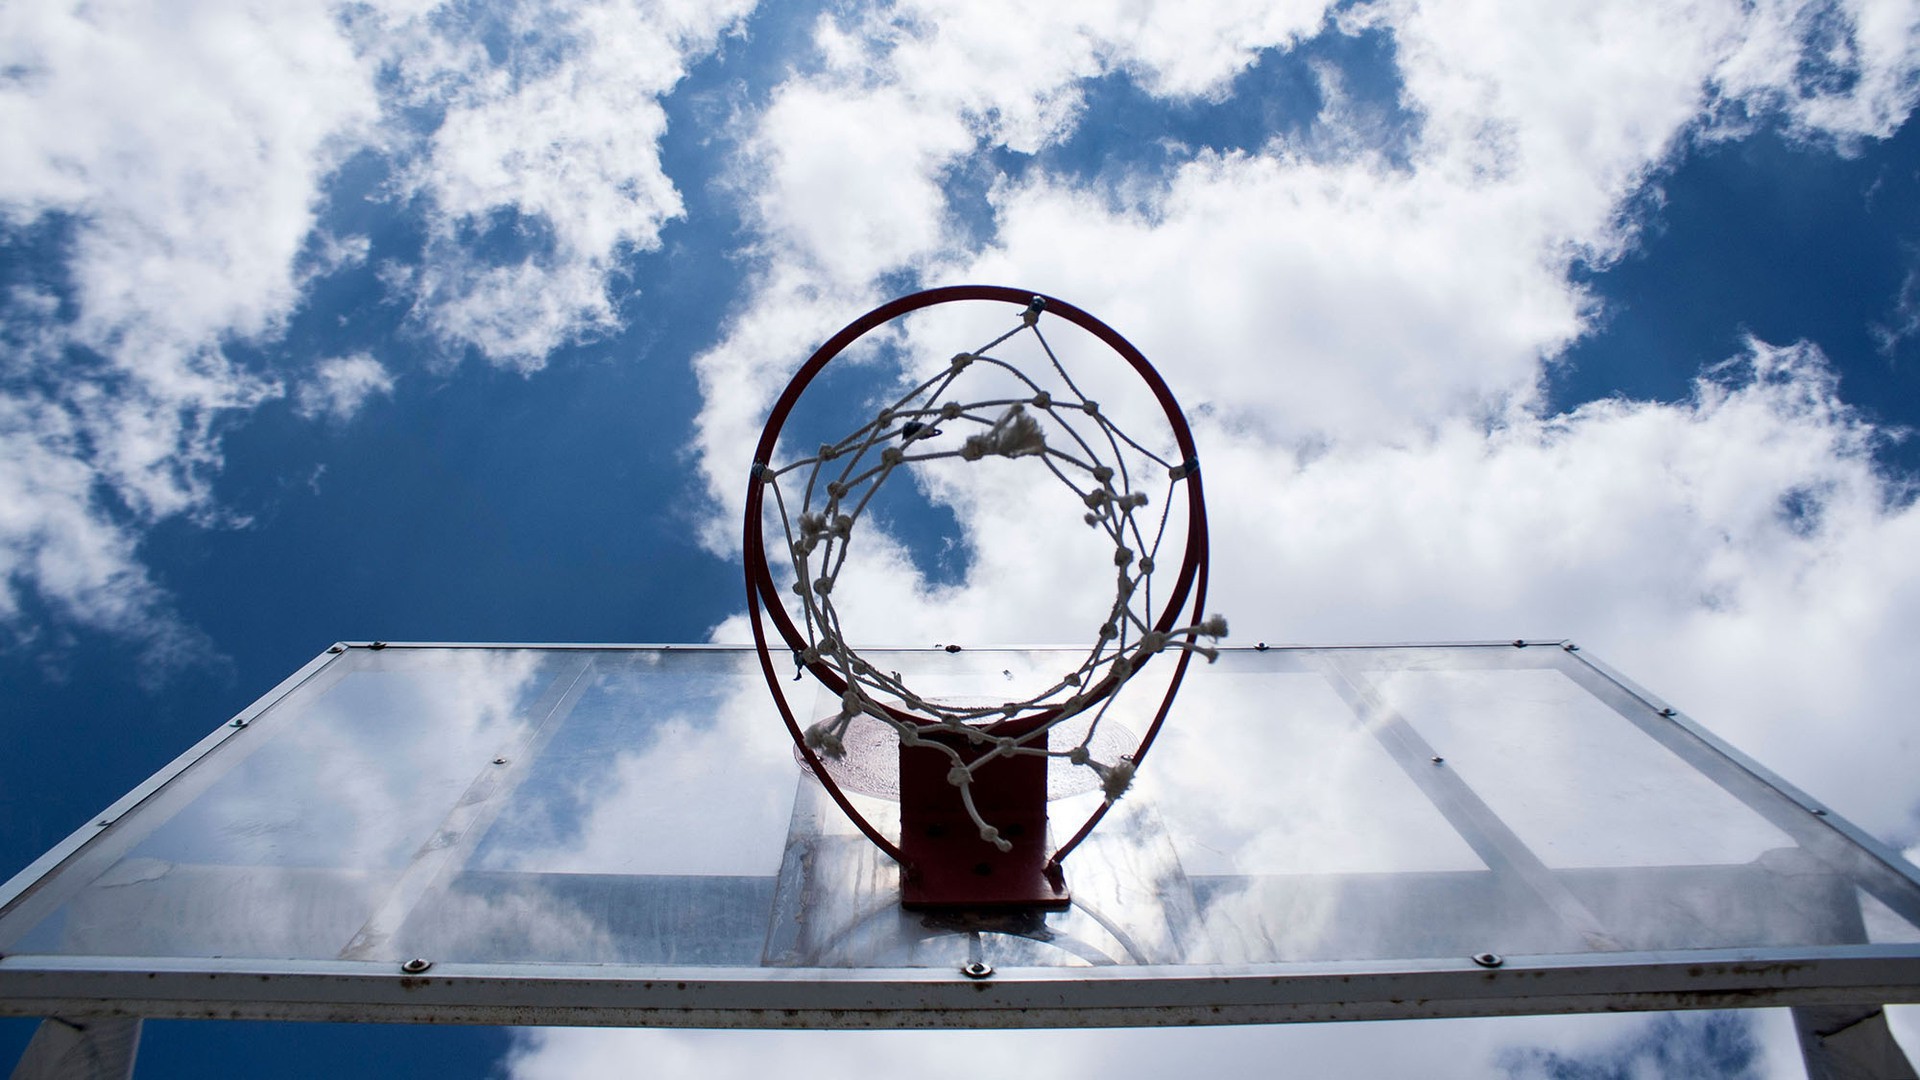 A basketball hoop in Zinacantán, Chiapas, Mex. The sport has become a popular game for many indigenous communities in the highlands of Chiapas. Many say the courts are easier to build than a soccer field due to mountainous terrain. (Photo by Jessie Wardarski.)